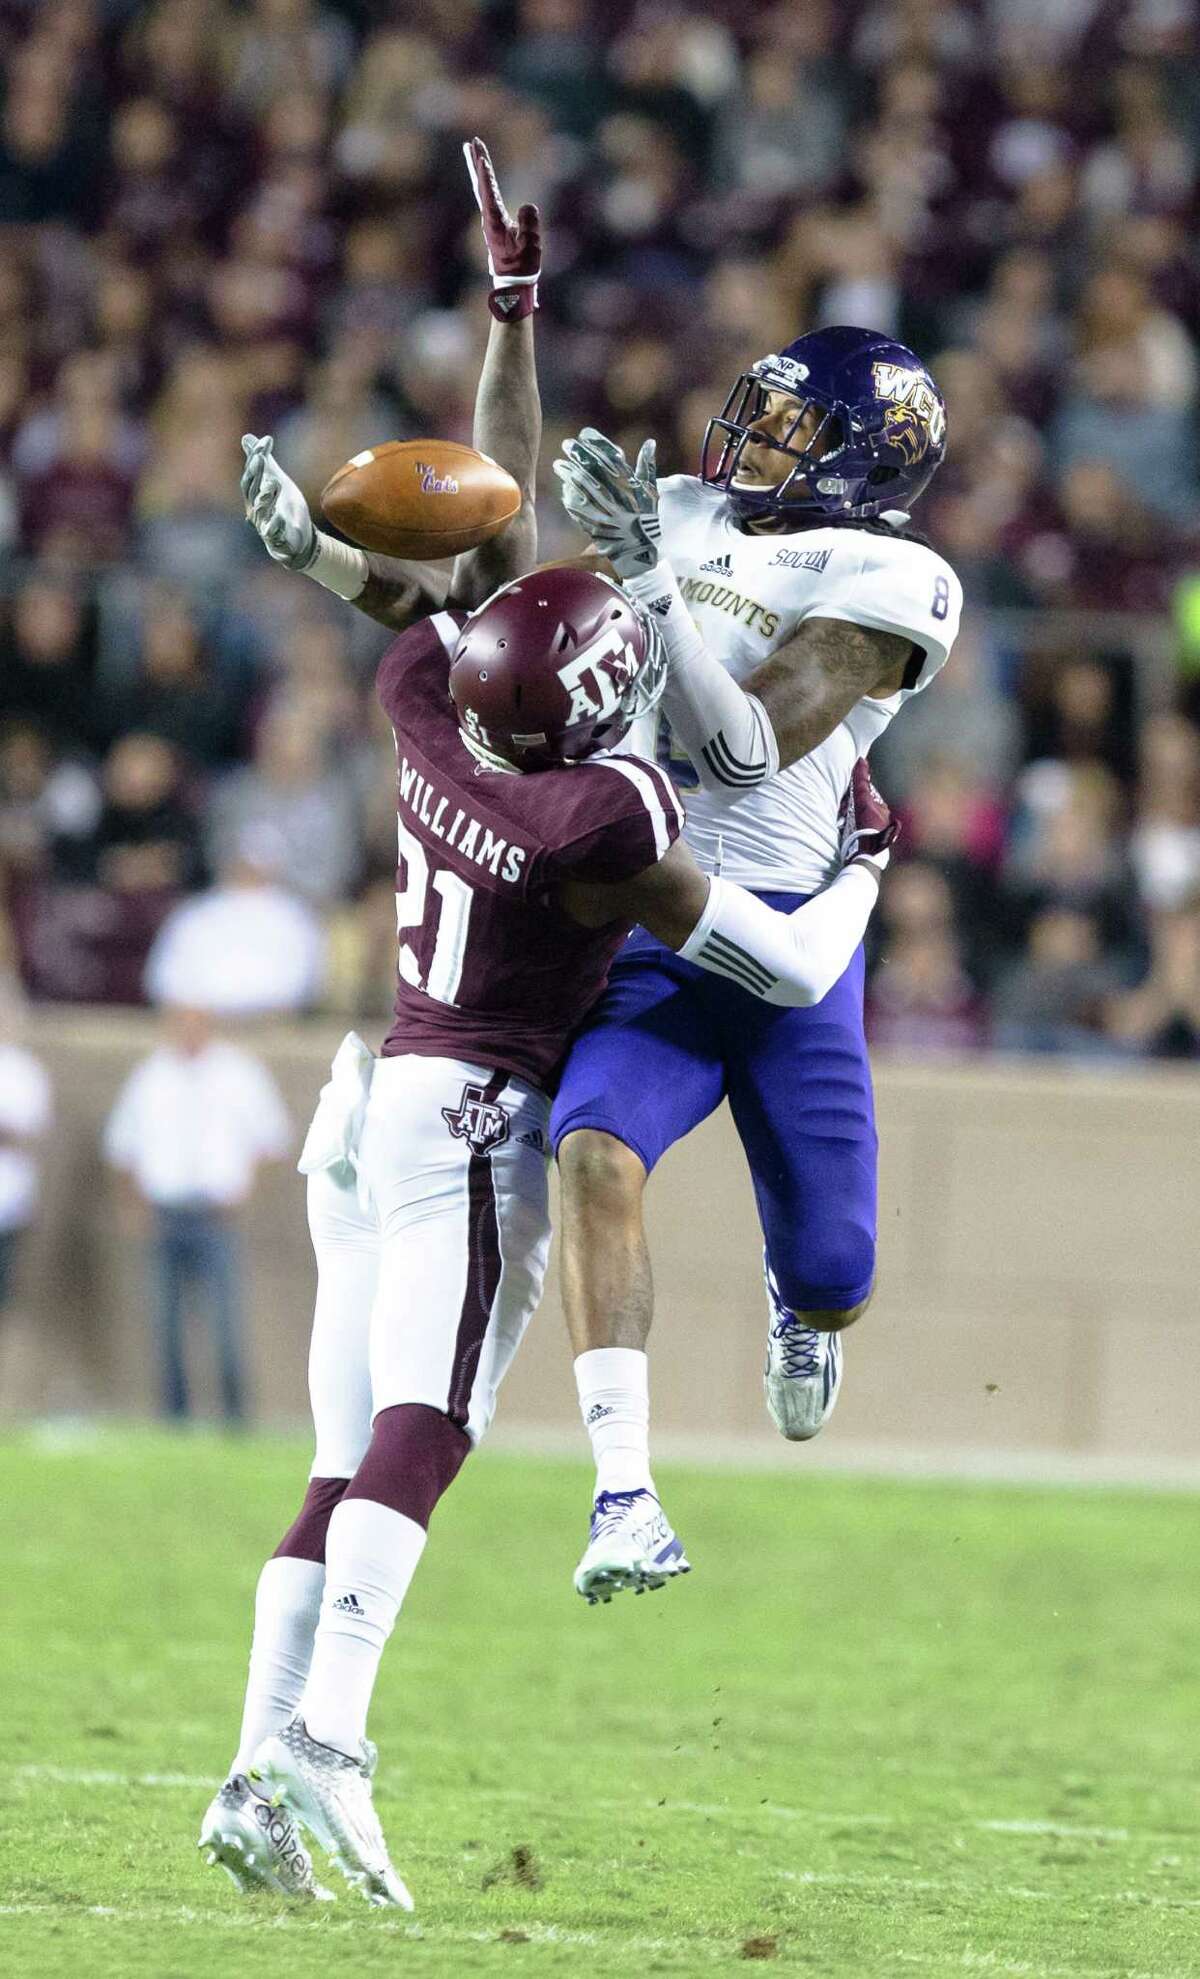 Western Carolina's Spearman Robinson (8) leaps over Texas A&M’s Brandon Williams (21) to make the catch during the first half of an NCAA college football game Saturday, Nov. 14, 2015, in College Station, Texas. (AP Photo/Juan DeLeon)